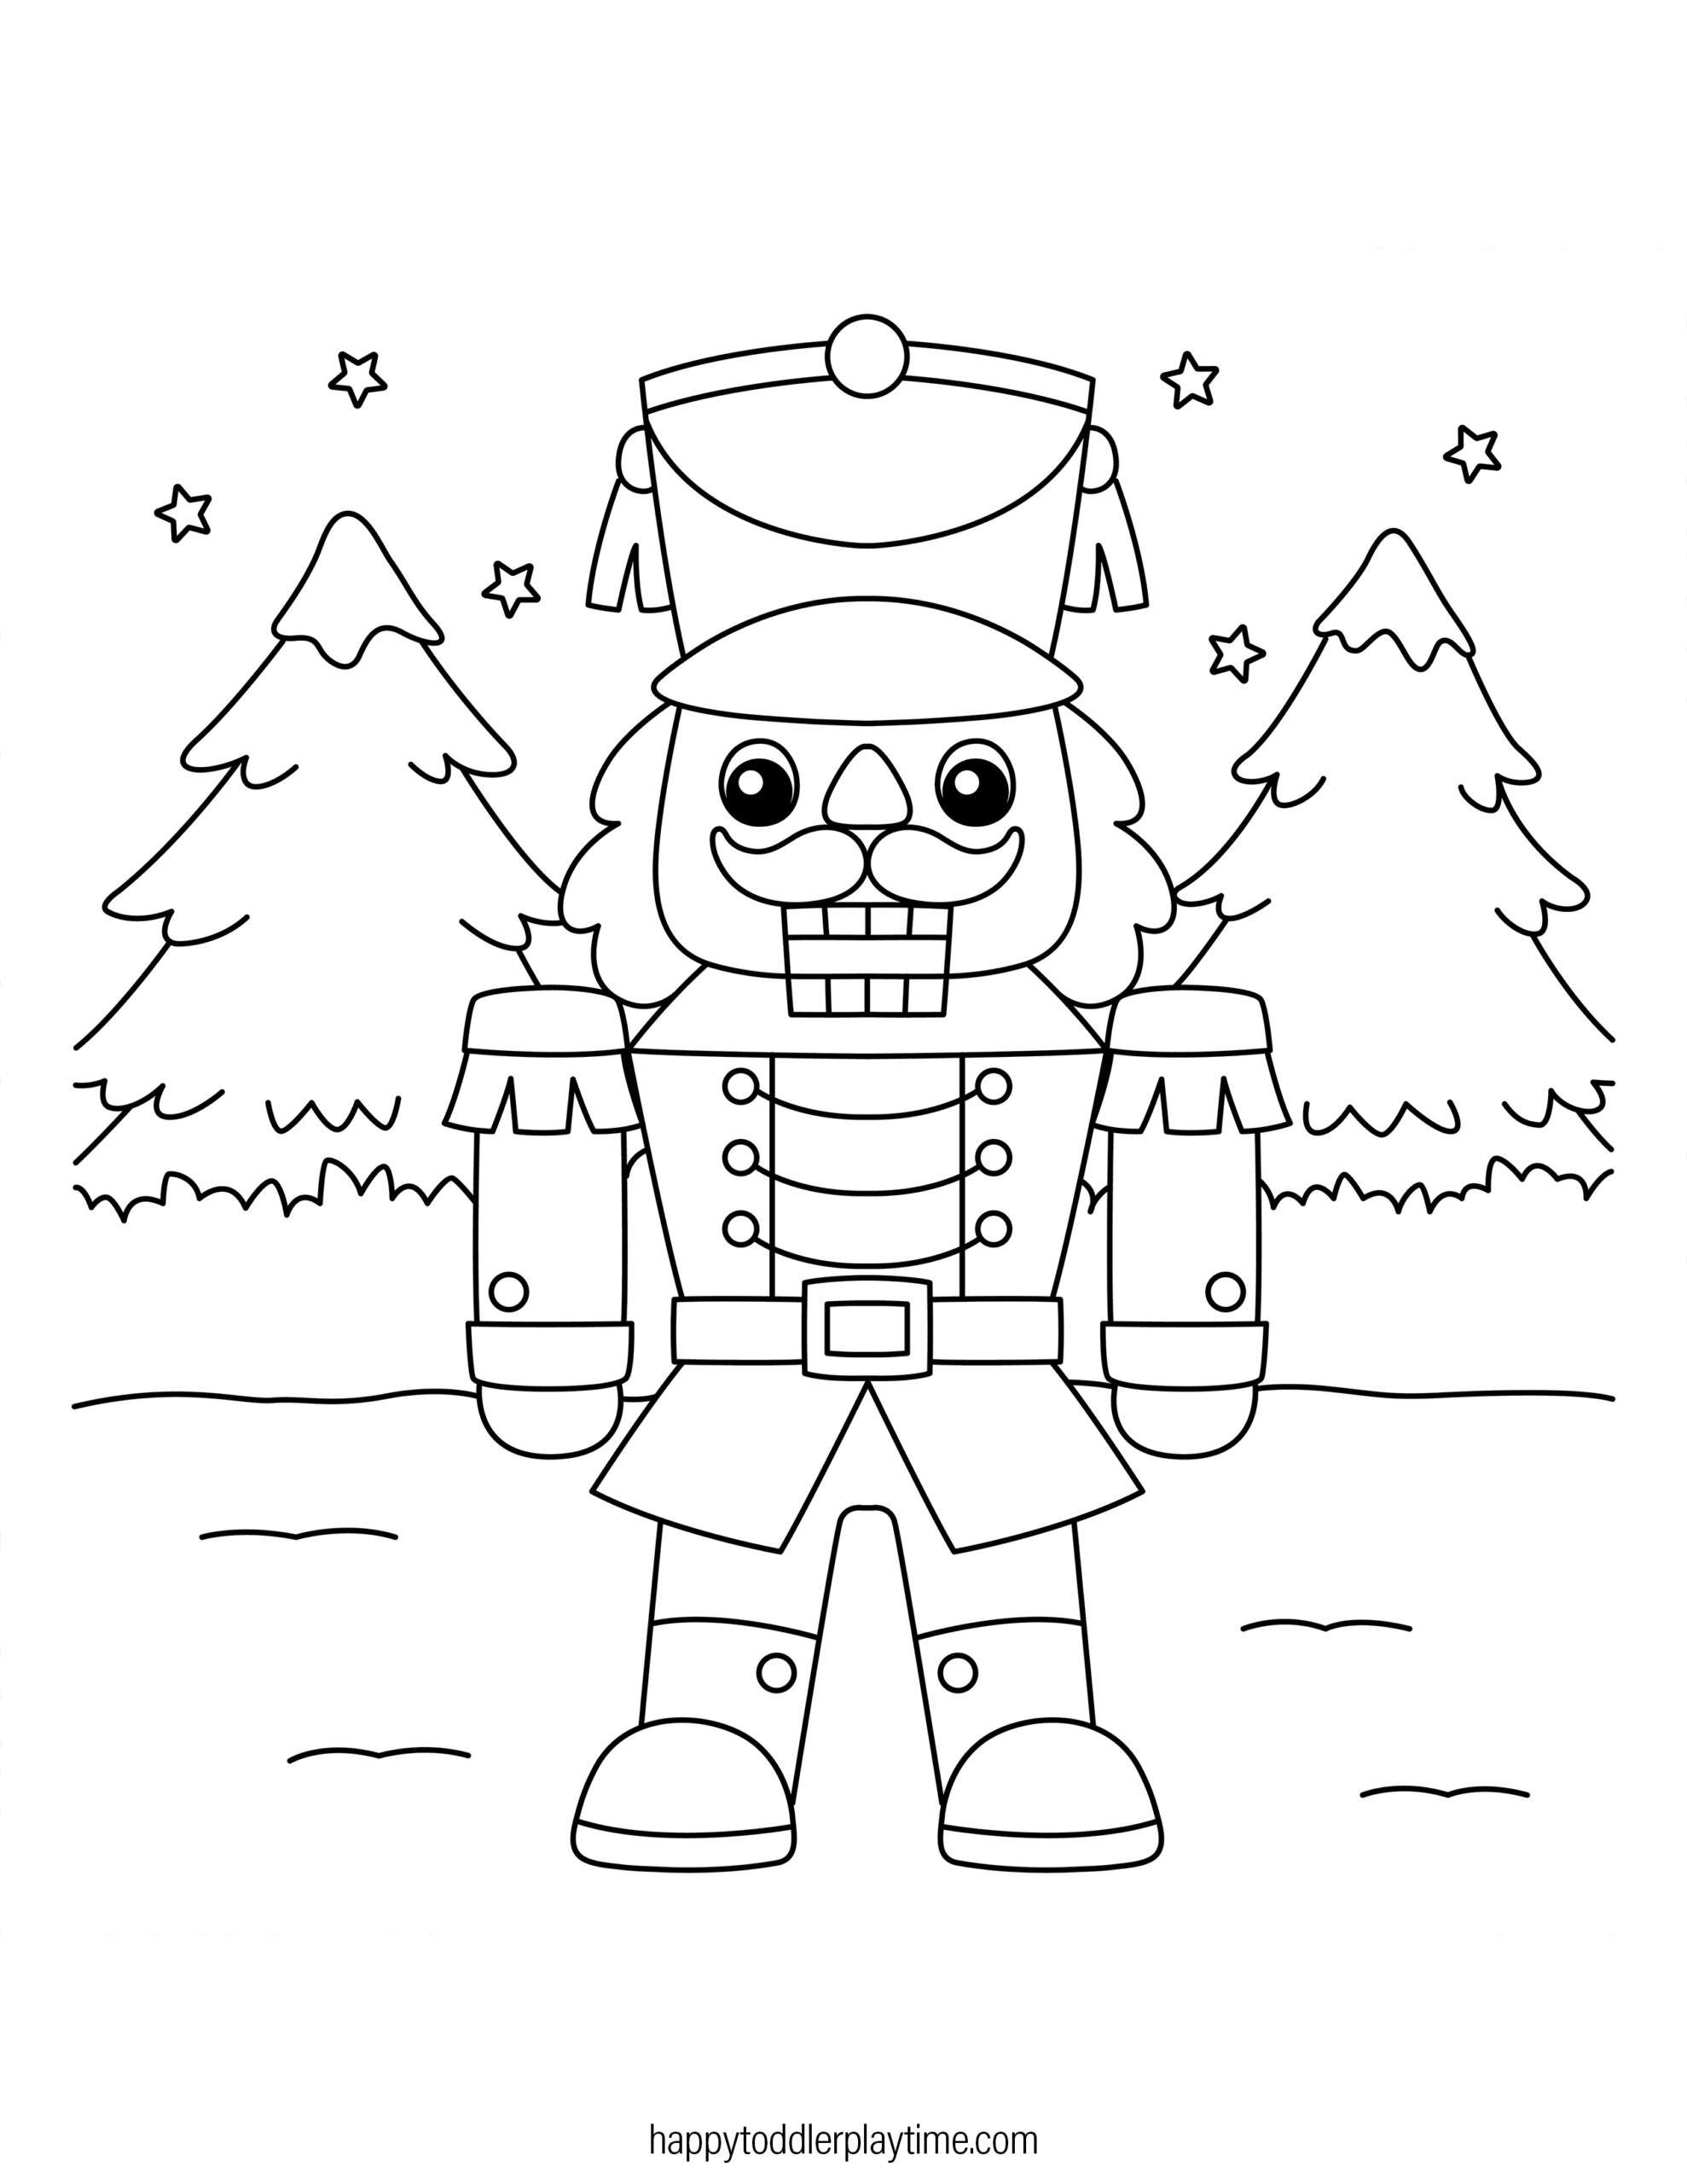 Free printable christmas nutcracker coloring pages